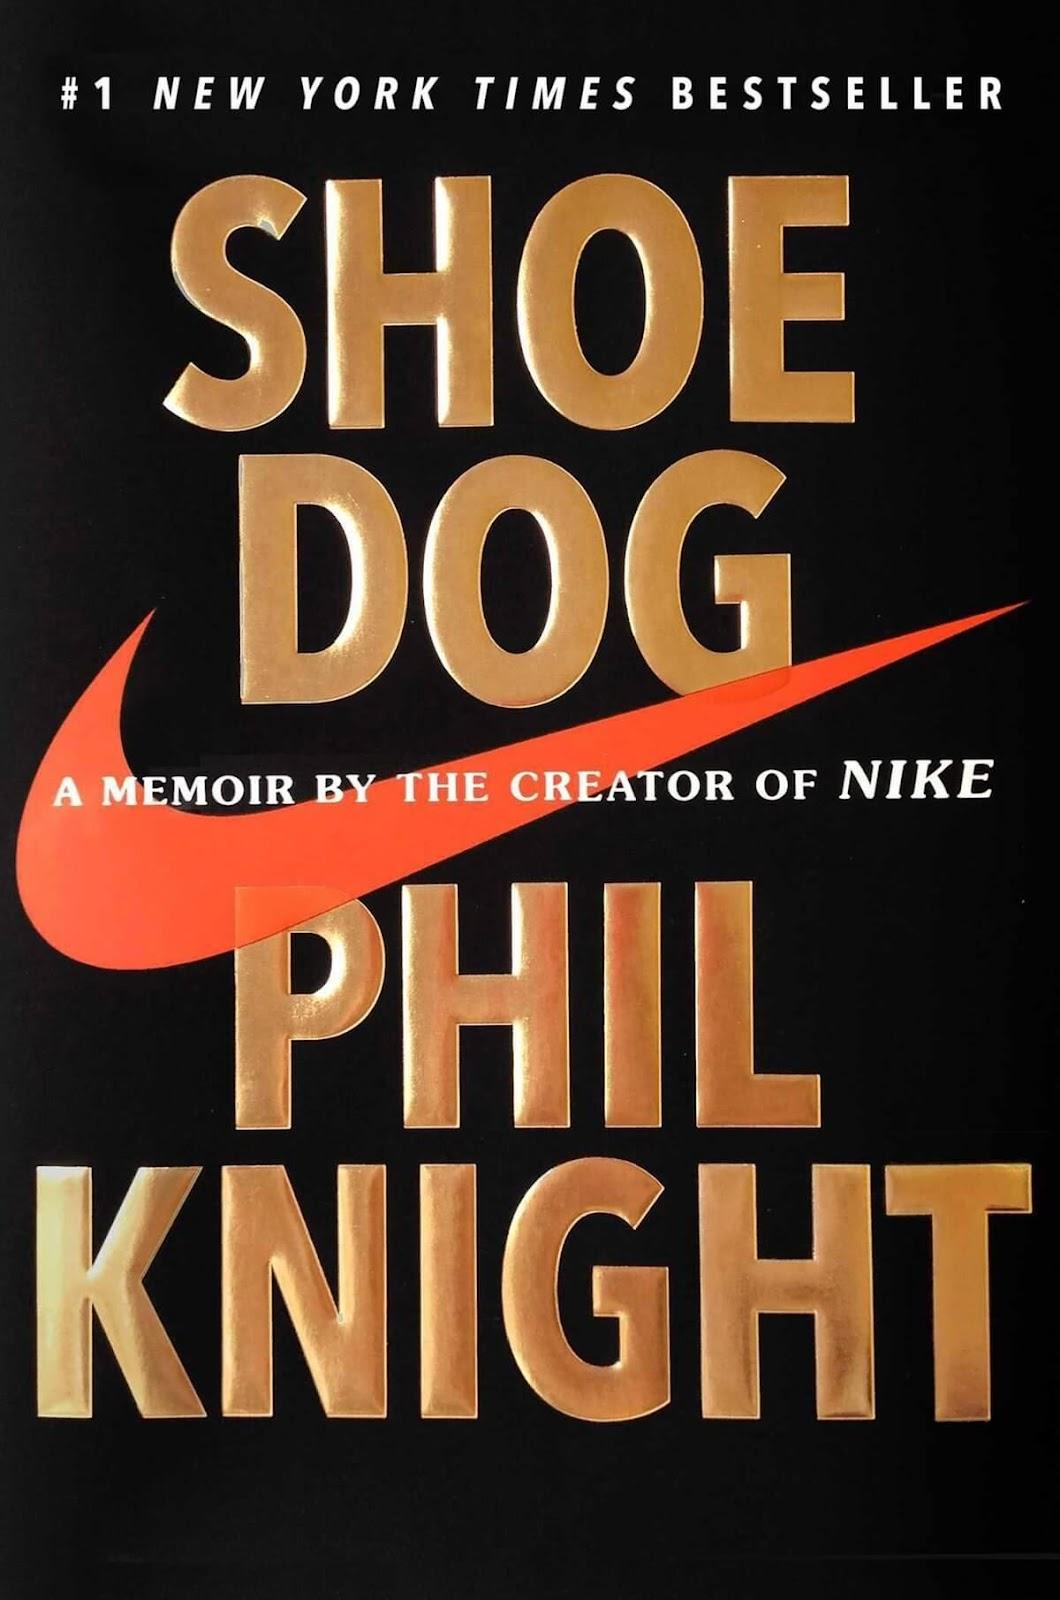 Book cover of Phil Knight's "Shoe Dog"